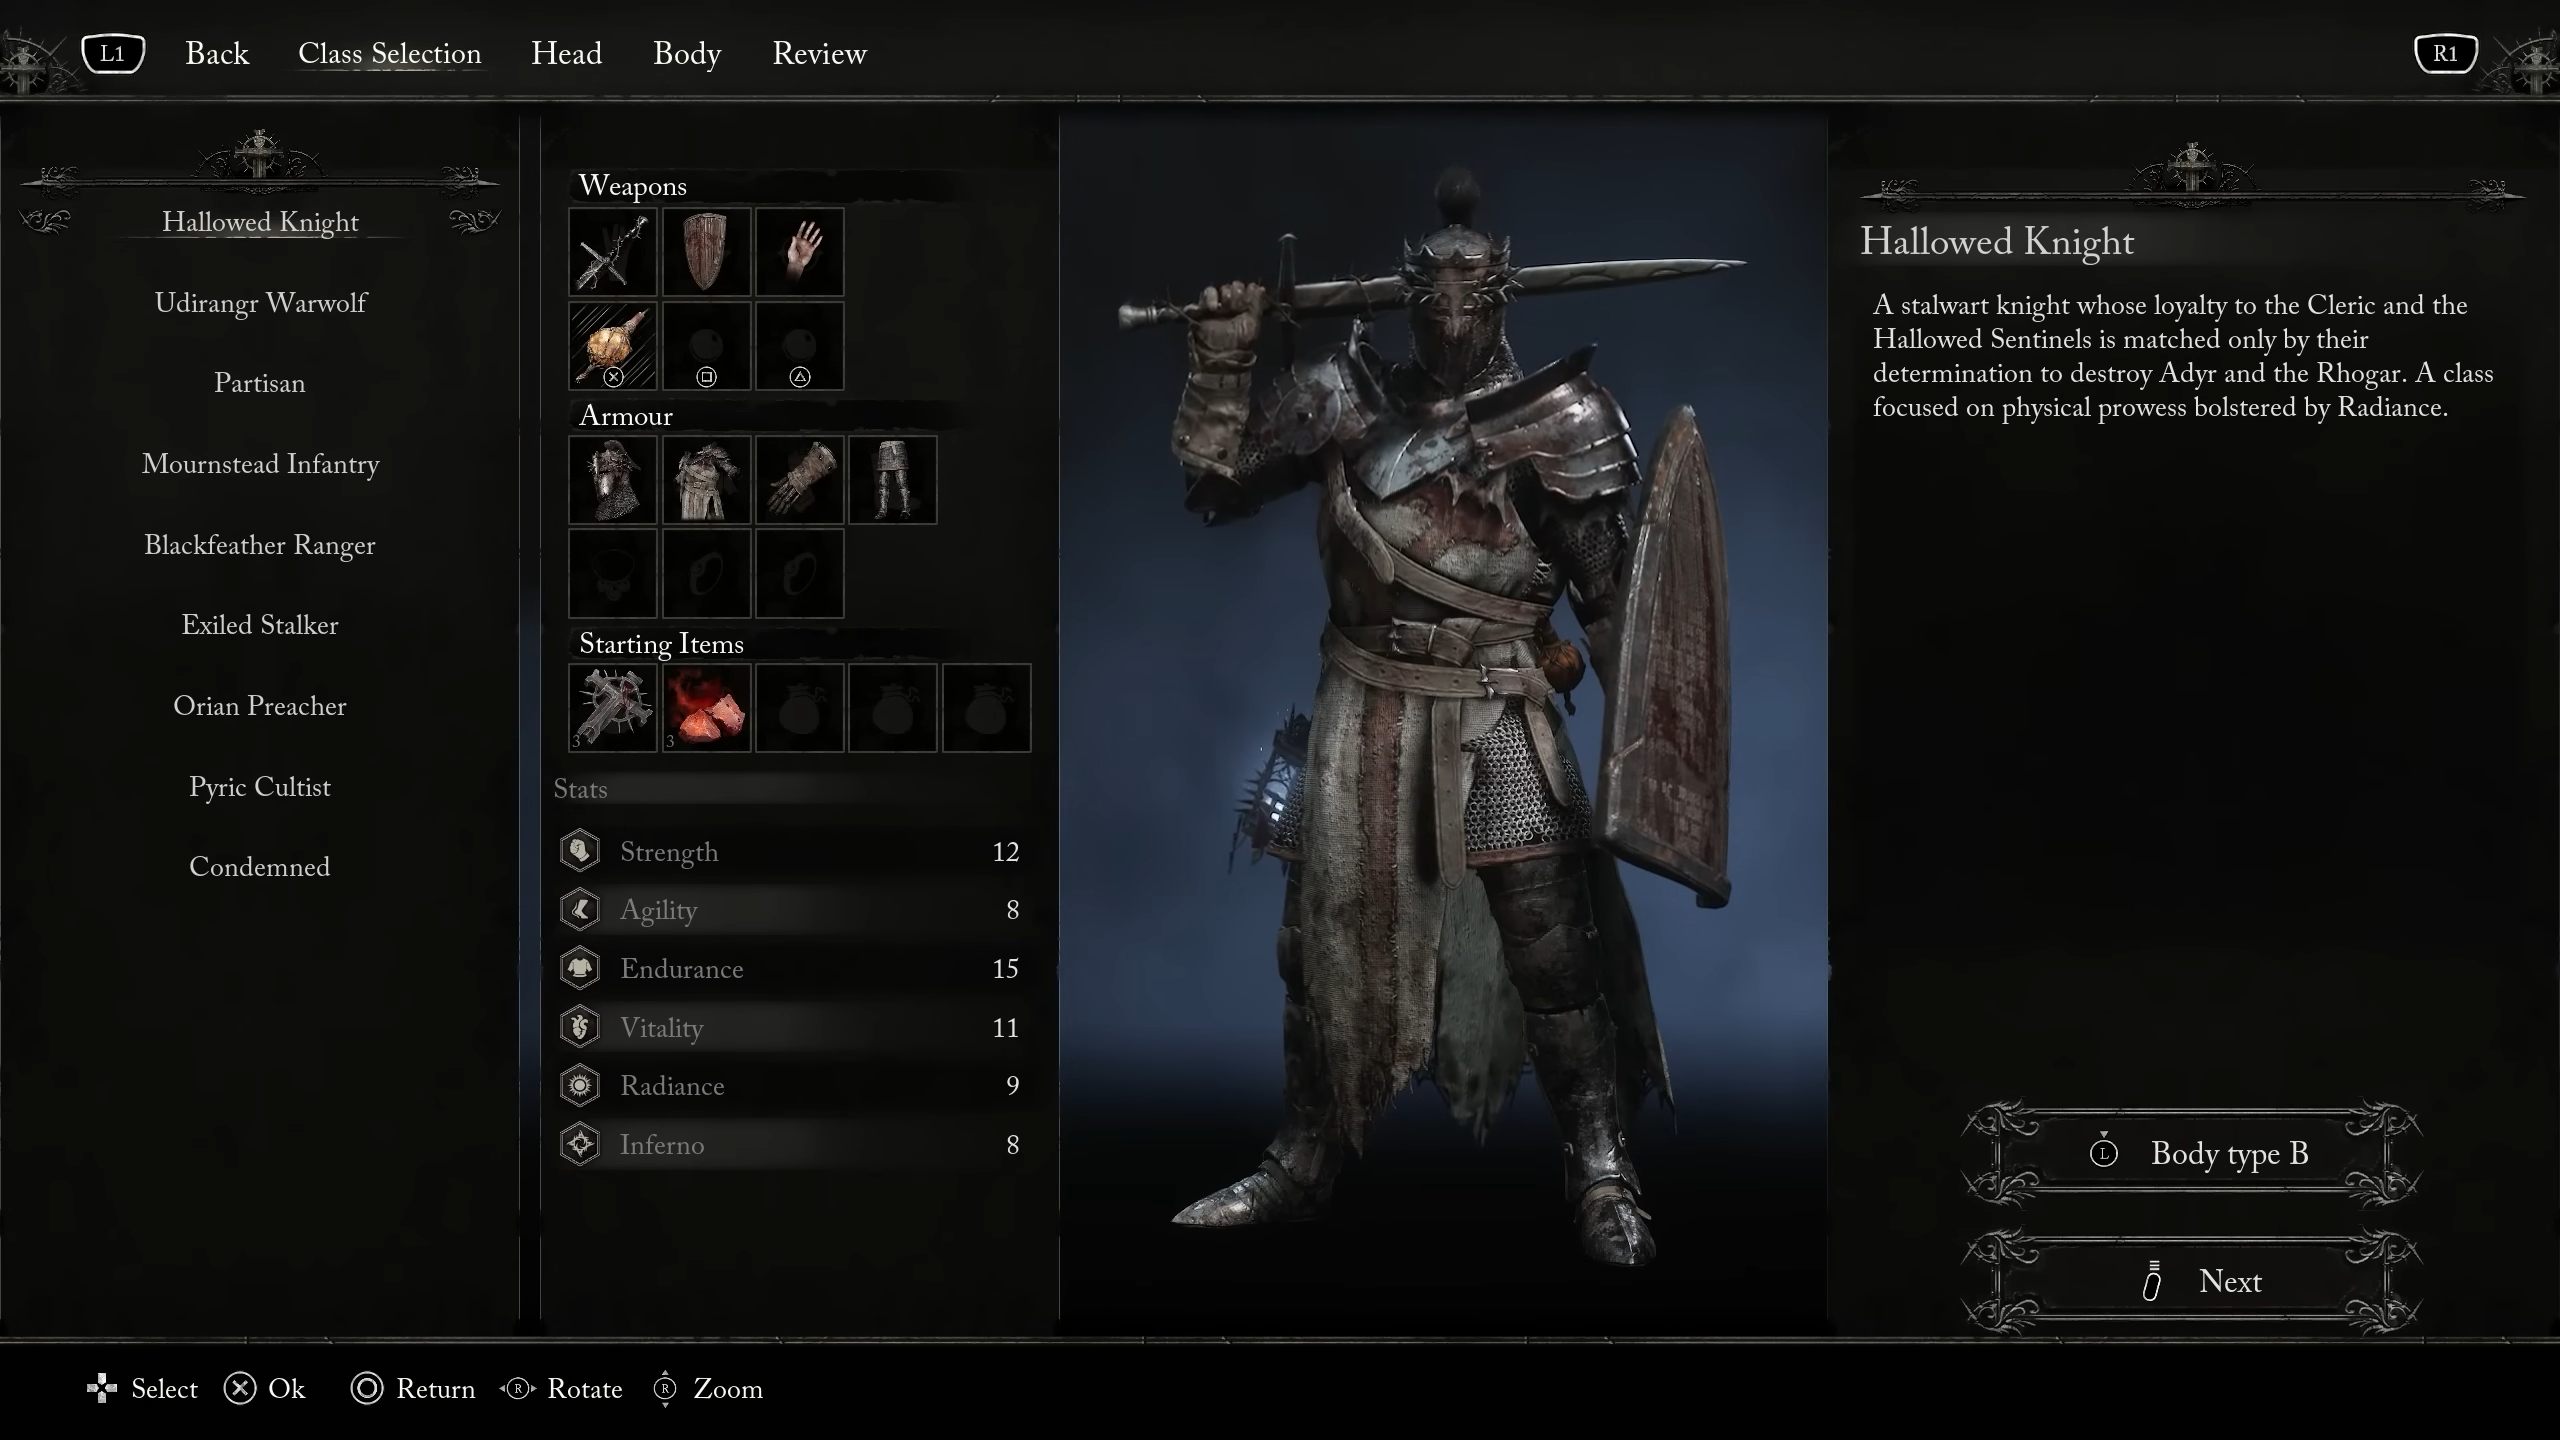 Class selection screen in Lords of the Fallen.